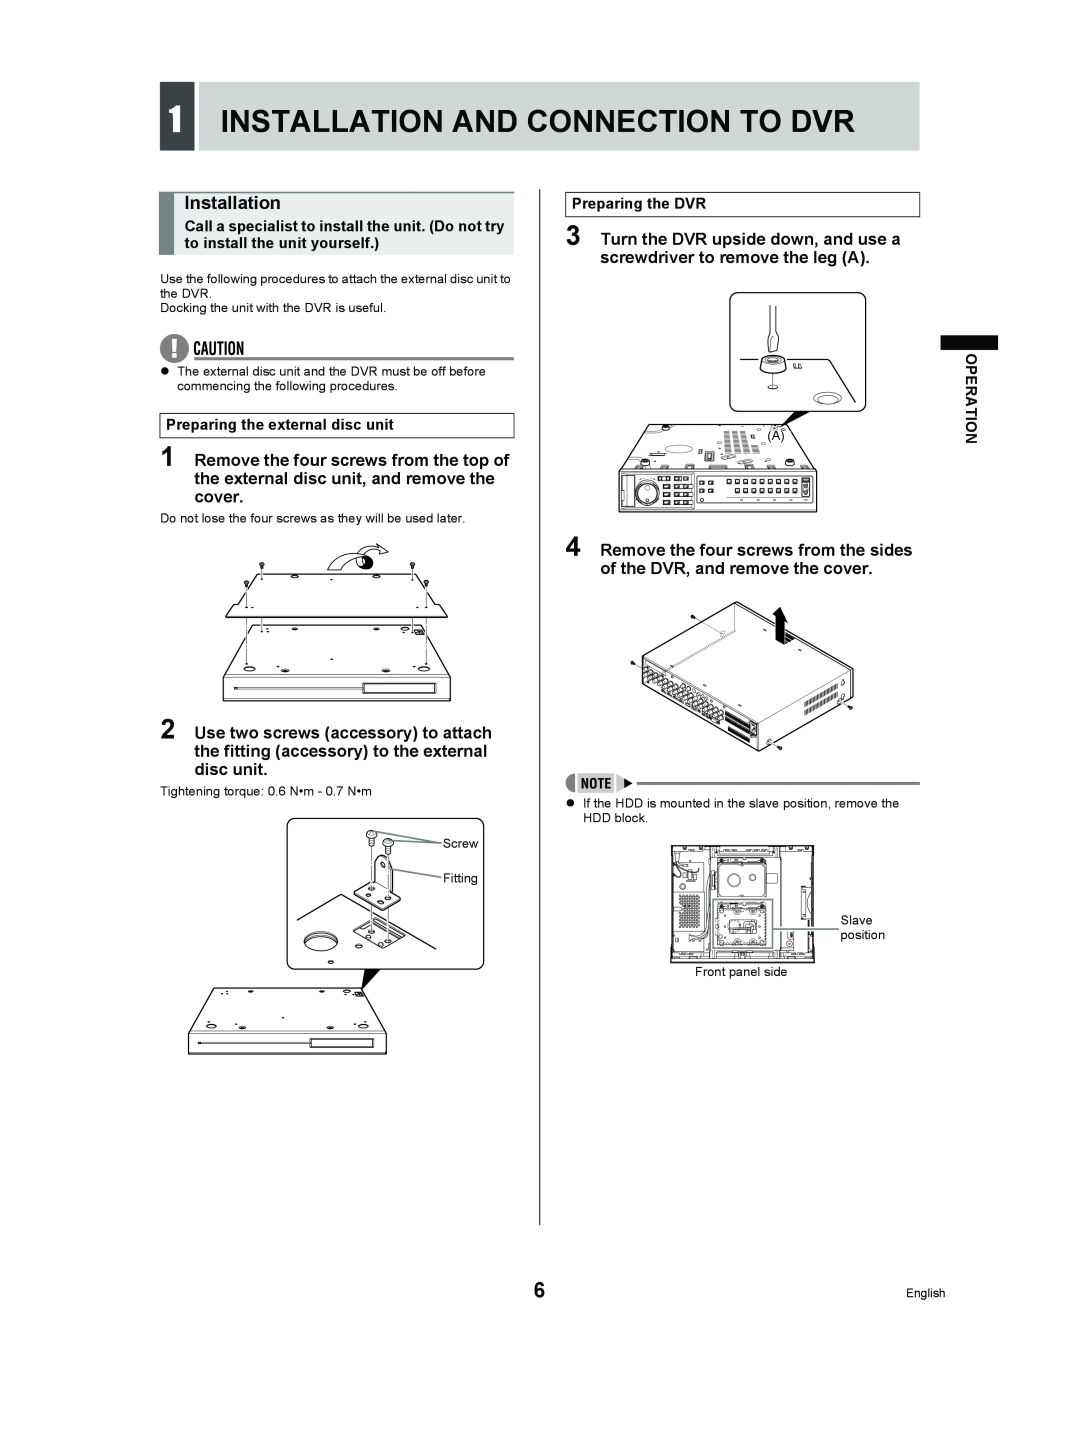 Sanyo VA-EXD1W instruction manual 1INSTALLATION AND CONNECTION TO DVR, Installation 